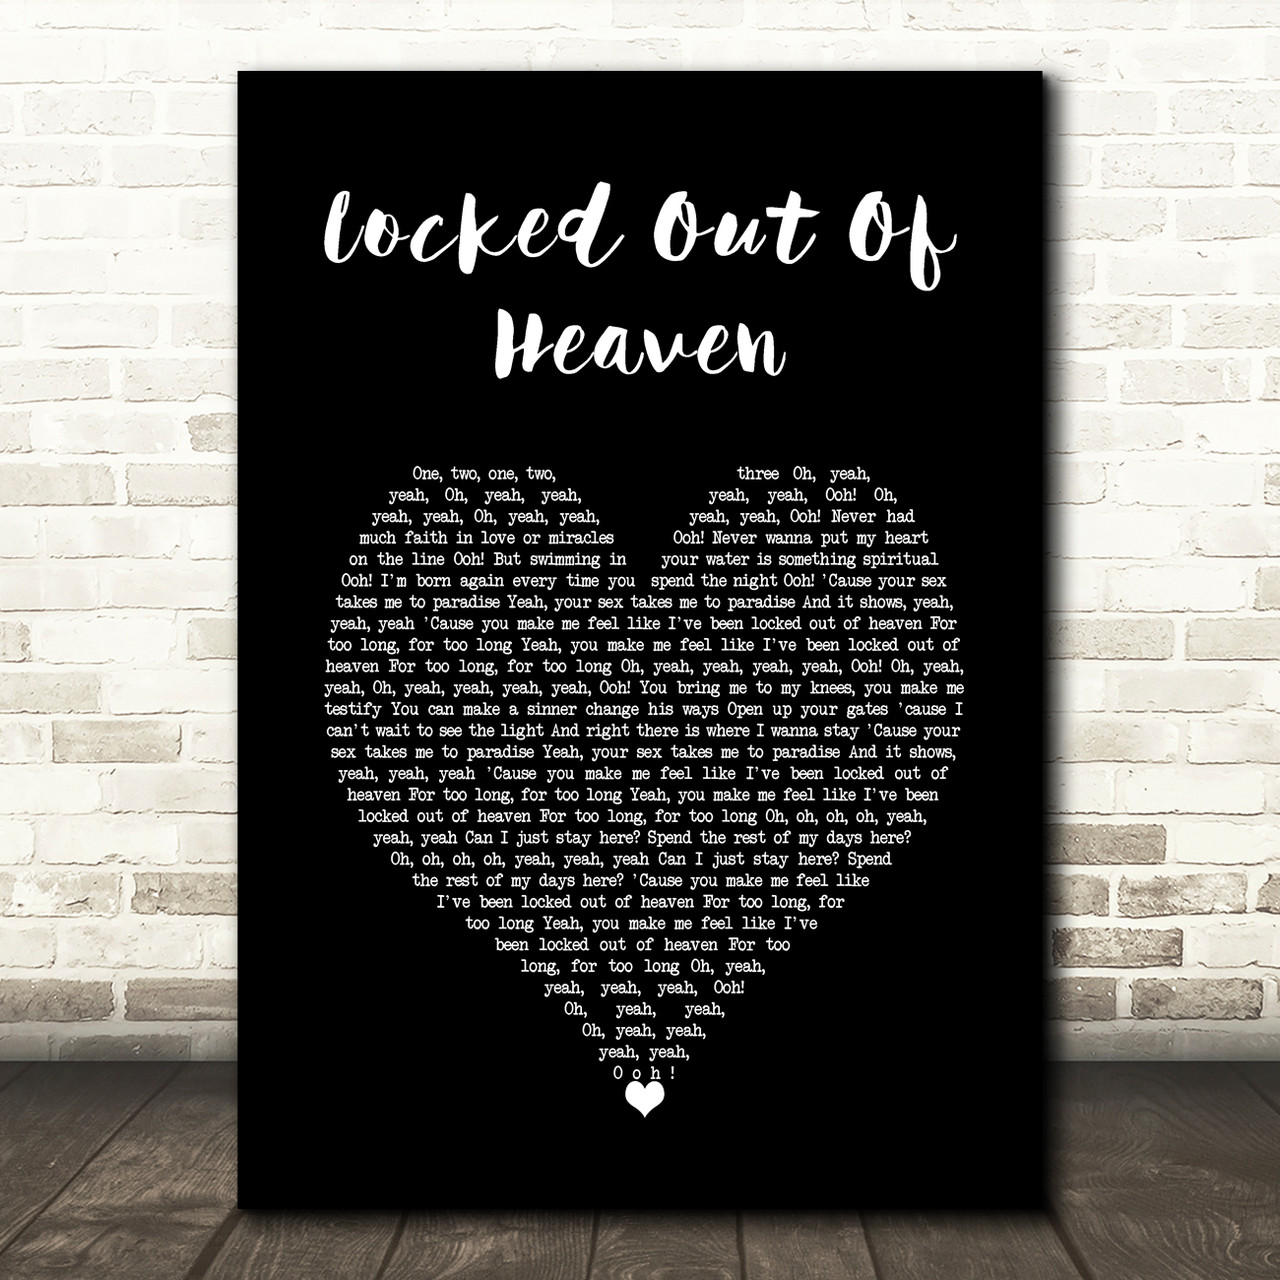 locked out of heaven art